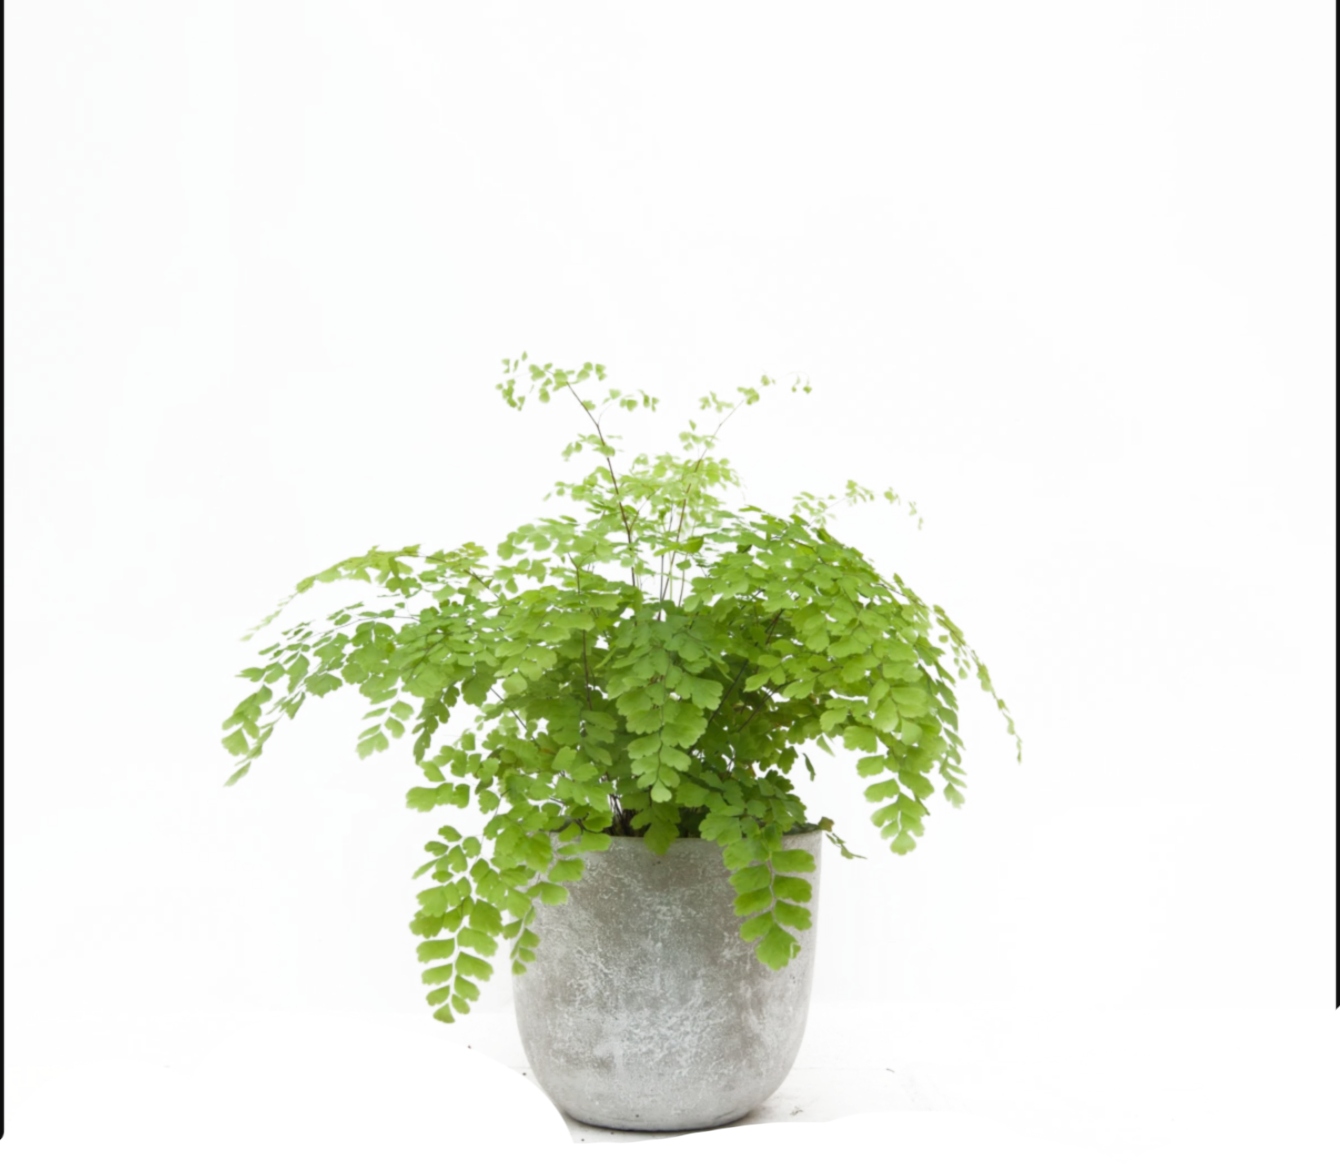 Our luxury gift guide for plants and other greenery